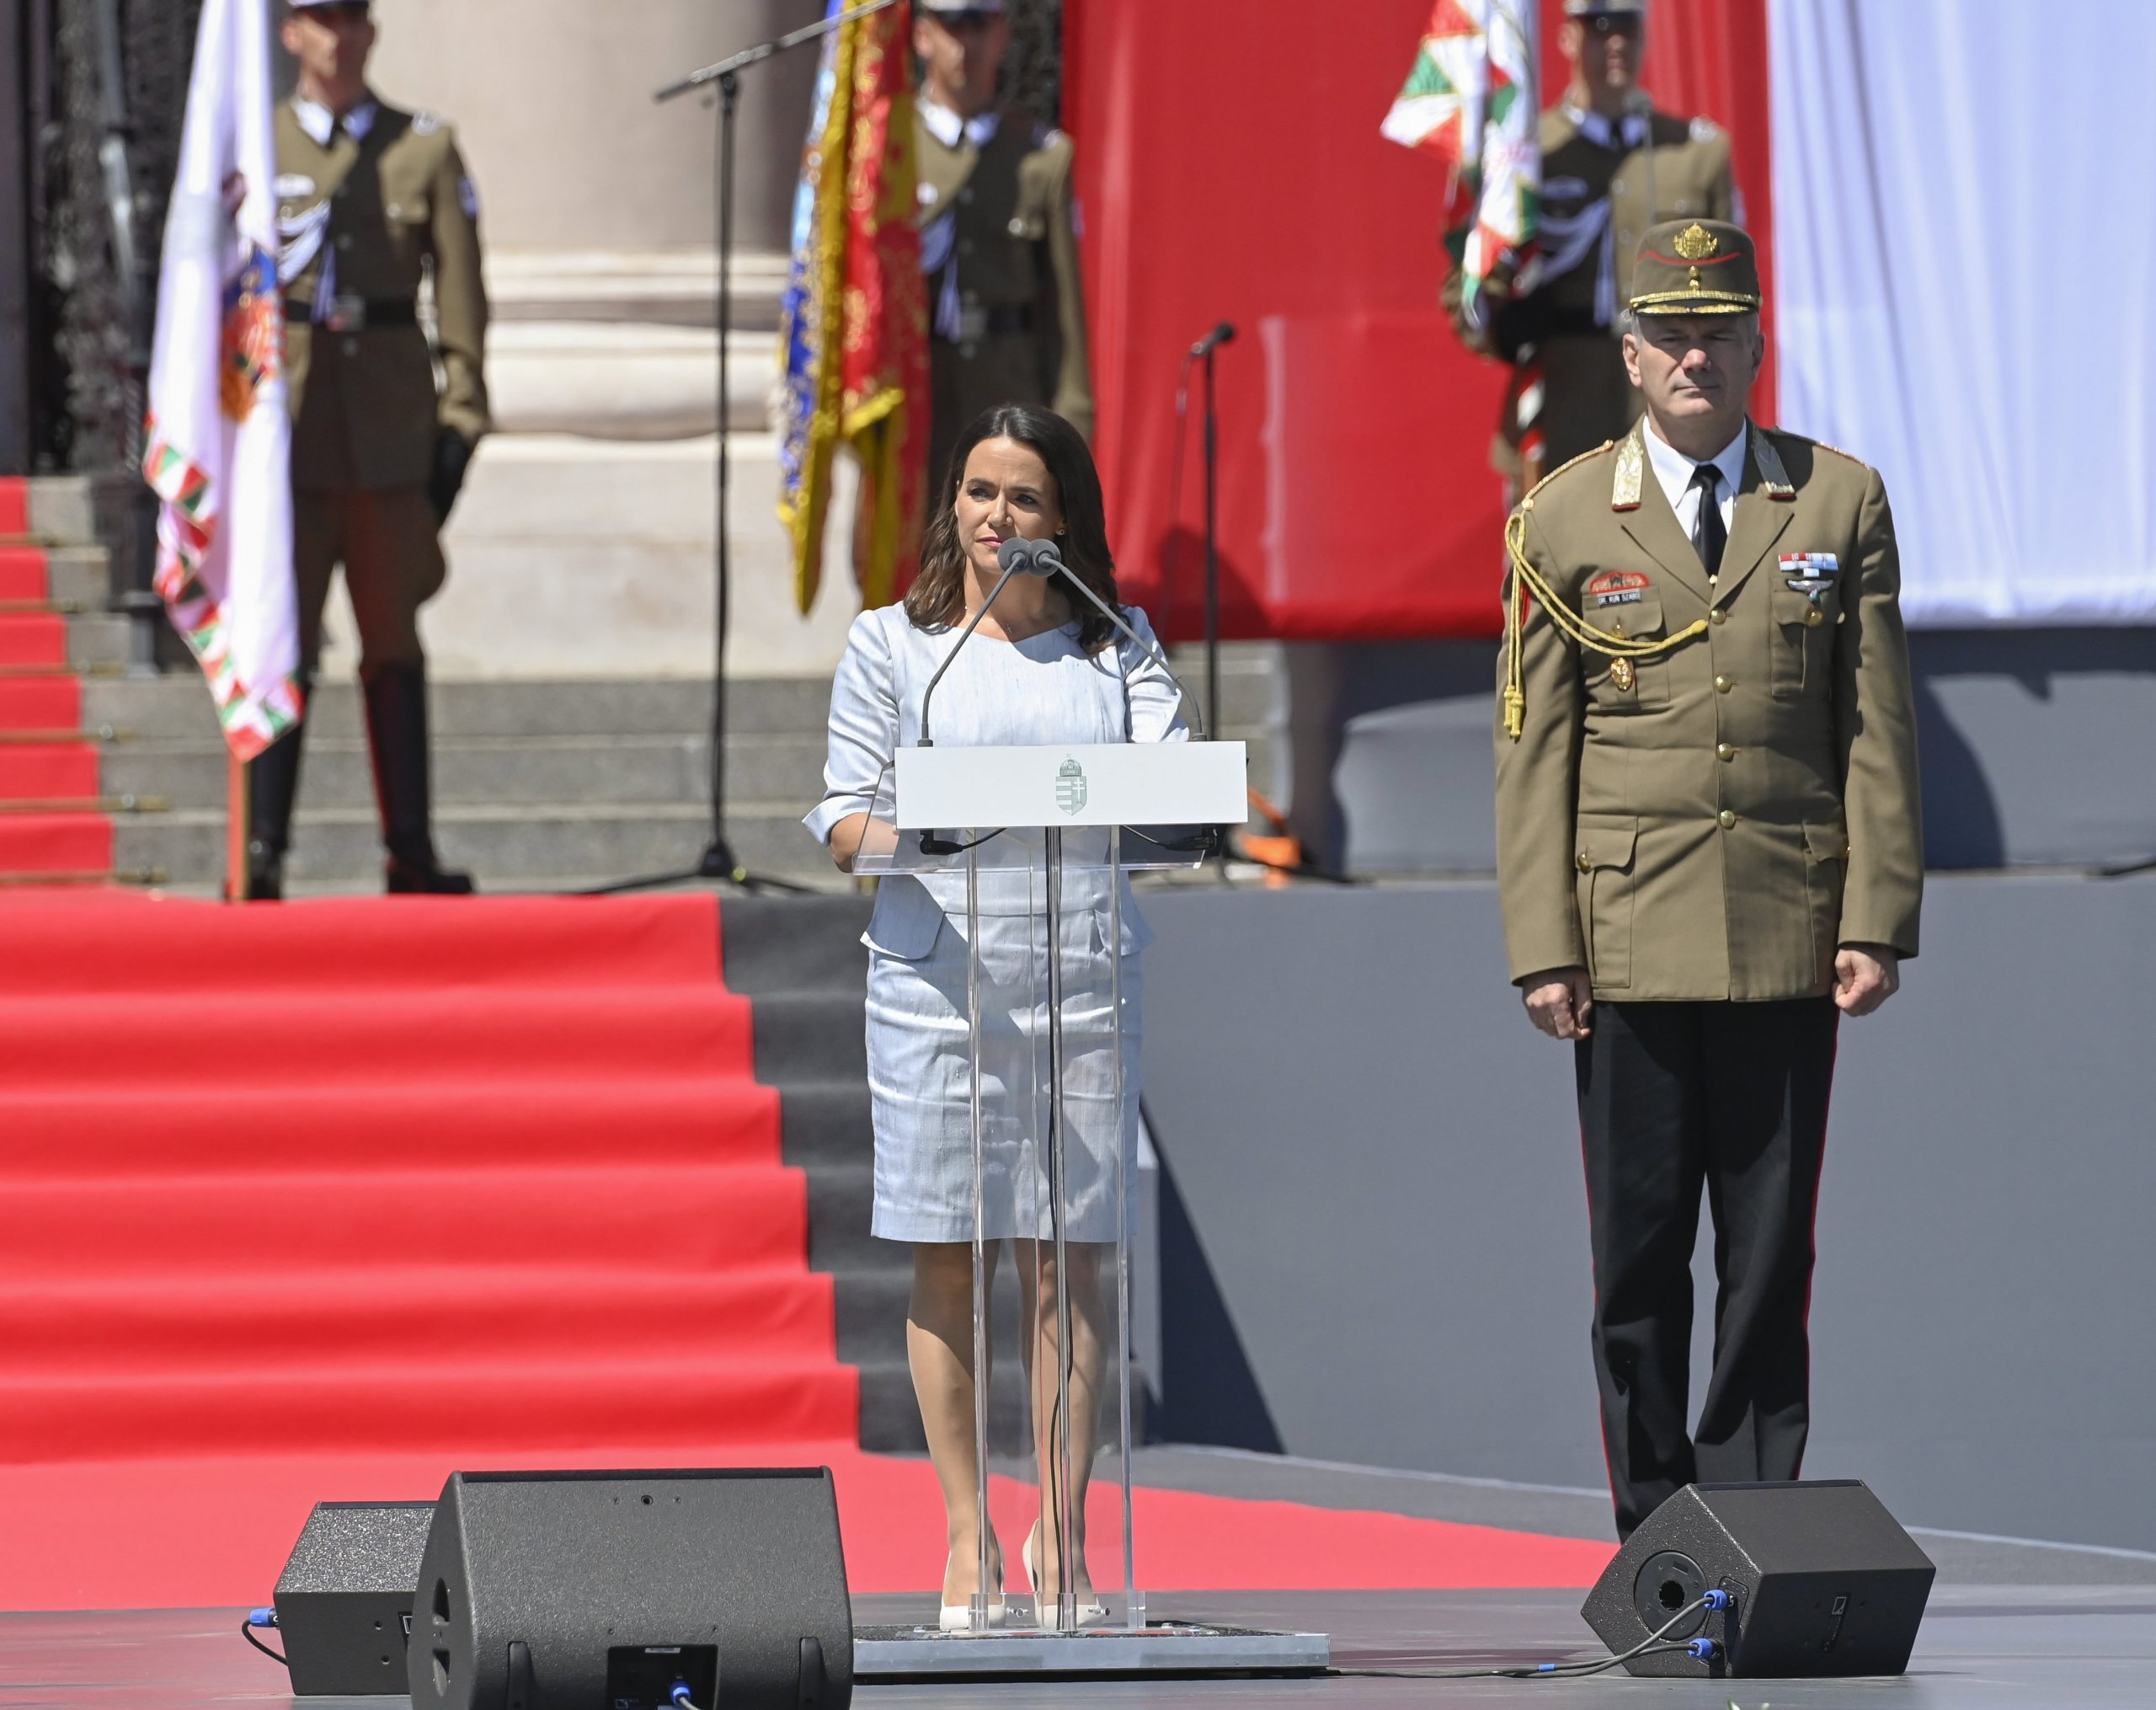 At Her Inauguration Ceremony, Katalin Novák Promises to Be President of All Hungarians